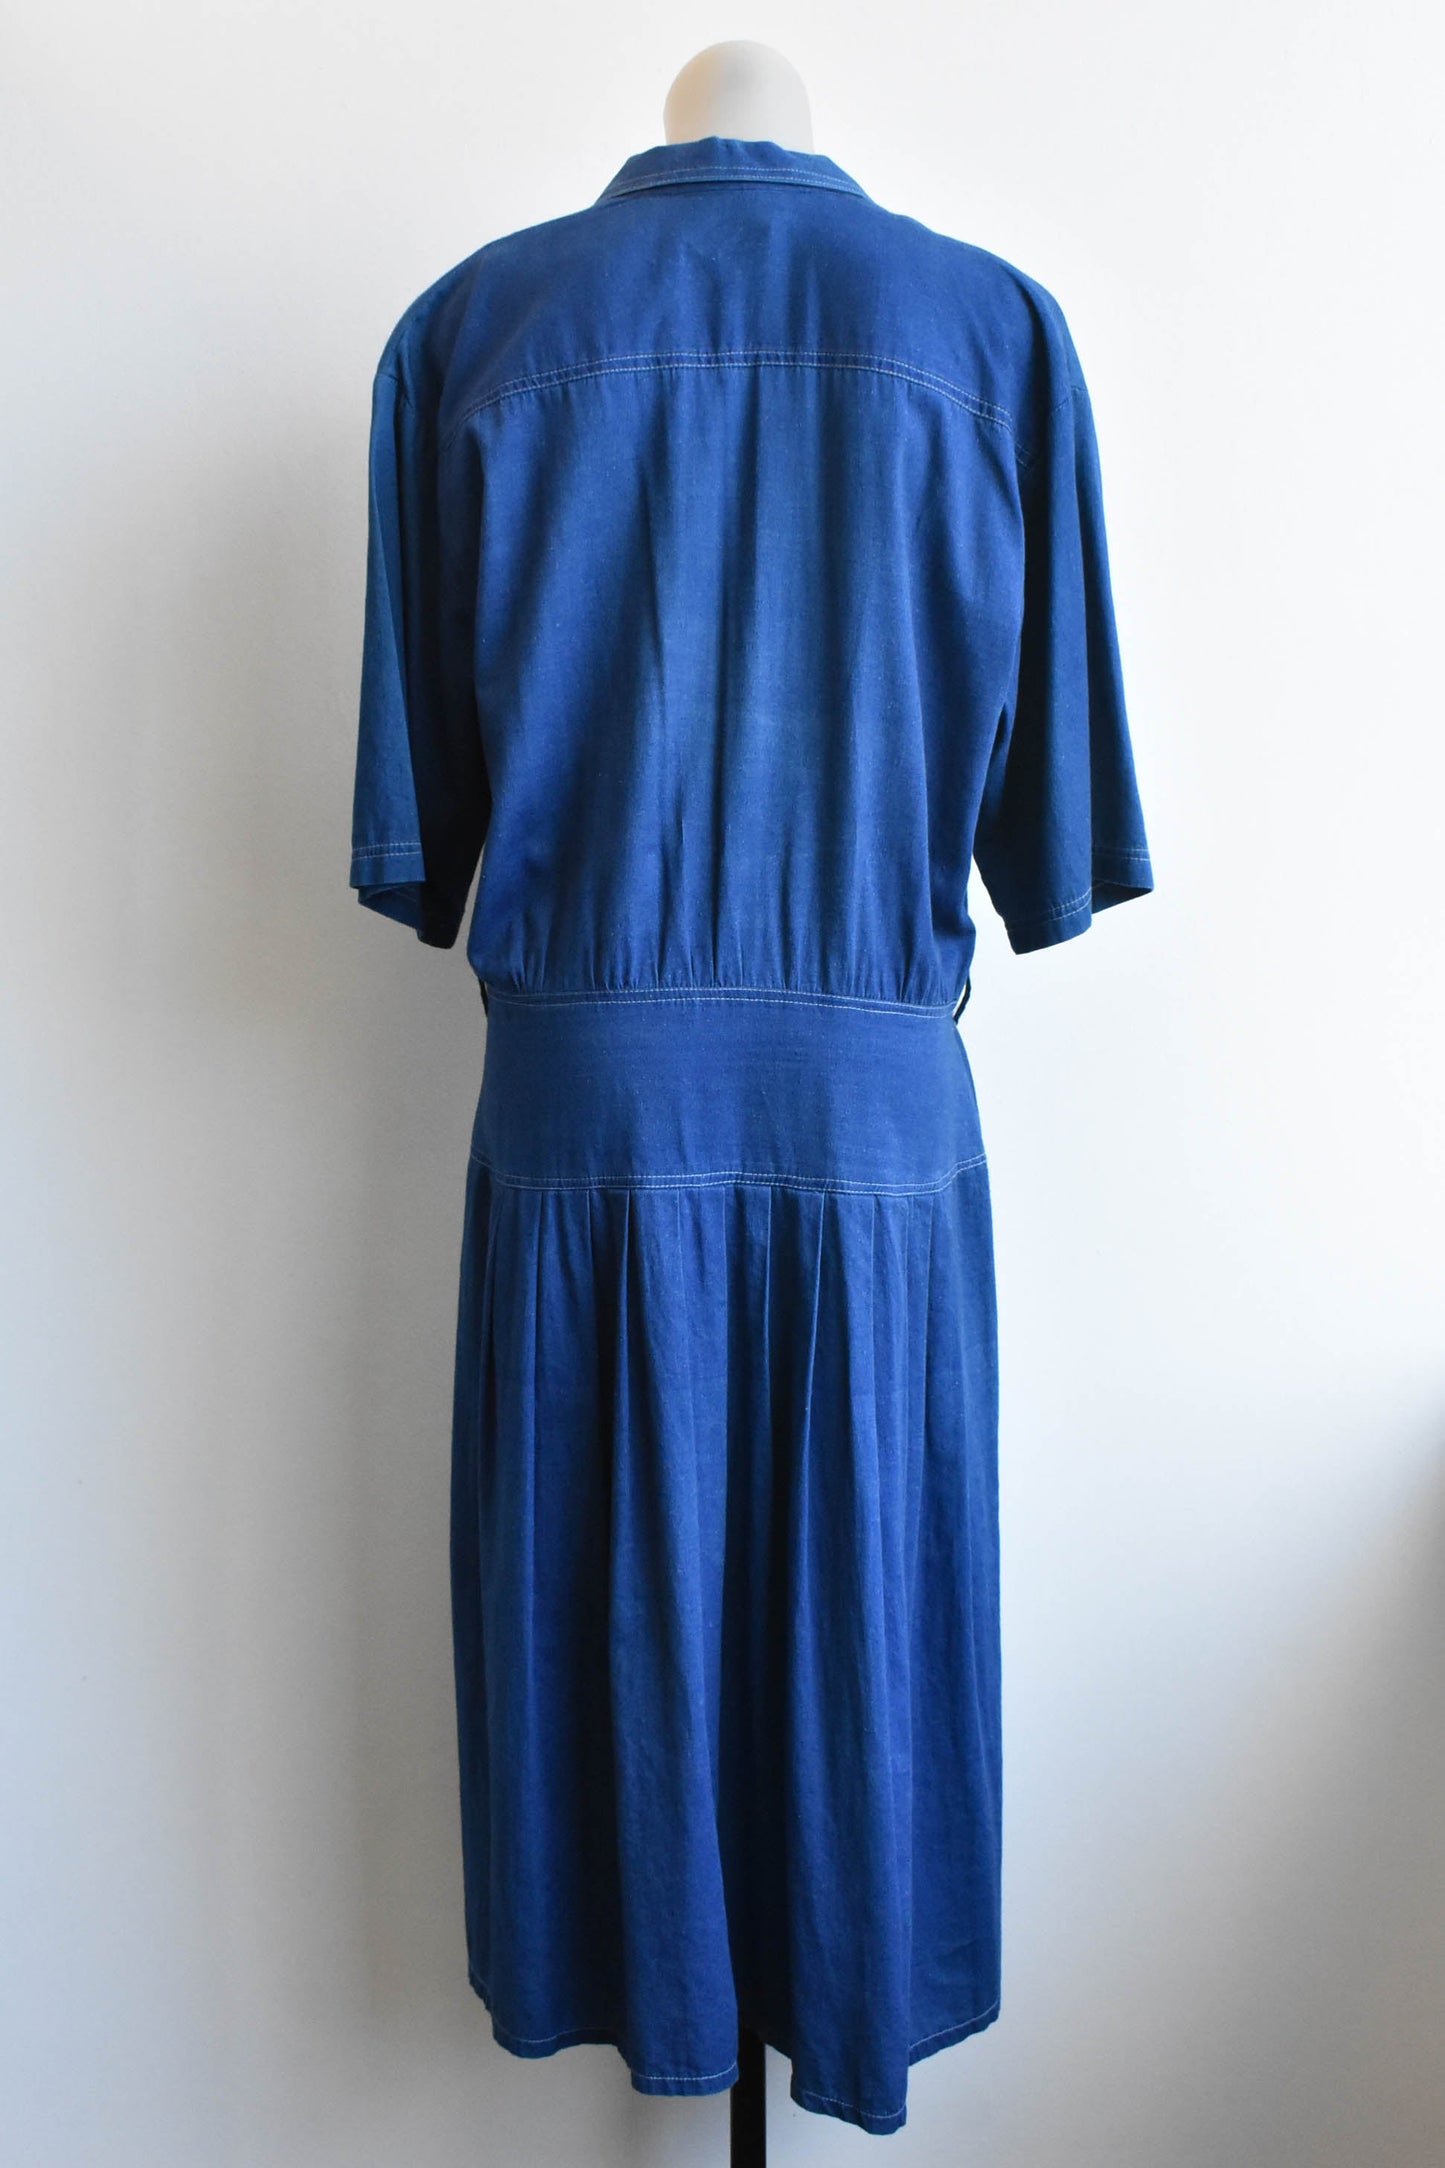 Retro blue chambray button-up pleated dress, size M